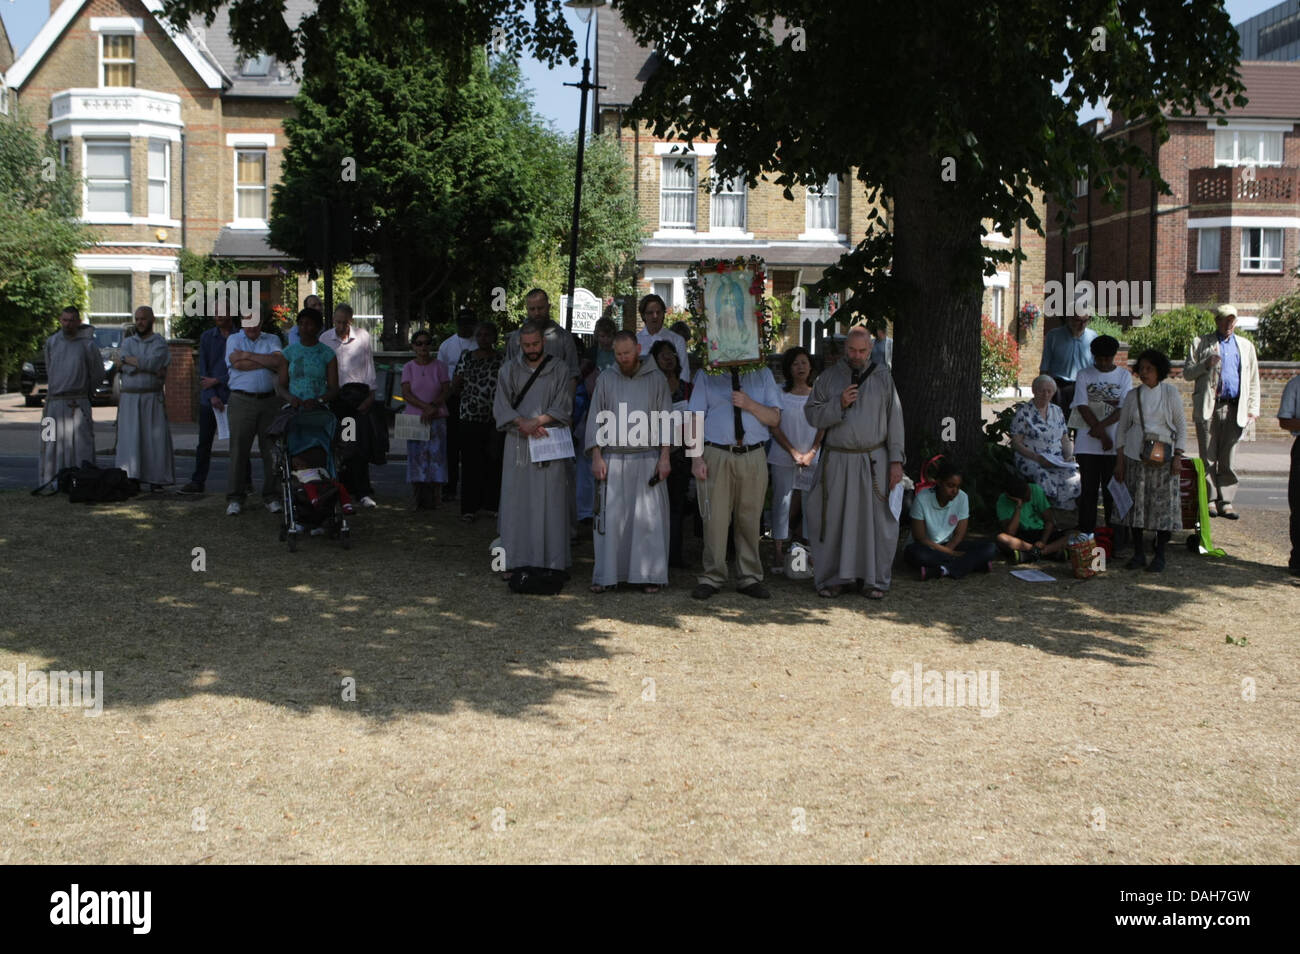 London, UK. 13th July 2013. Catholic anti abortionists praying and leafleting at the Marie Stopes Clinic in, Ealing, London, UK. 13th July 2013. Credit:  martyn wheatley/Alamy Live News Stock Photo